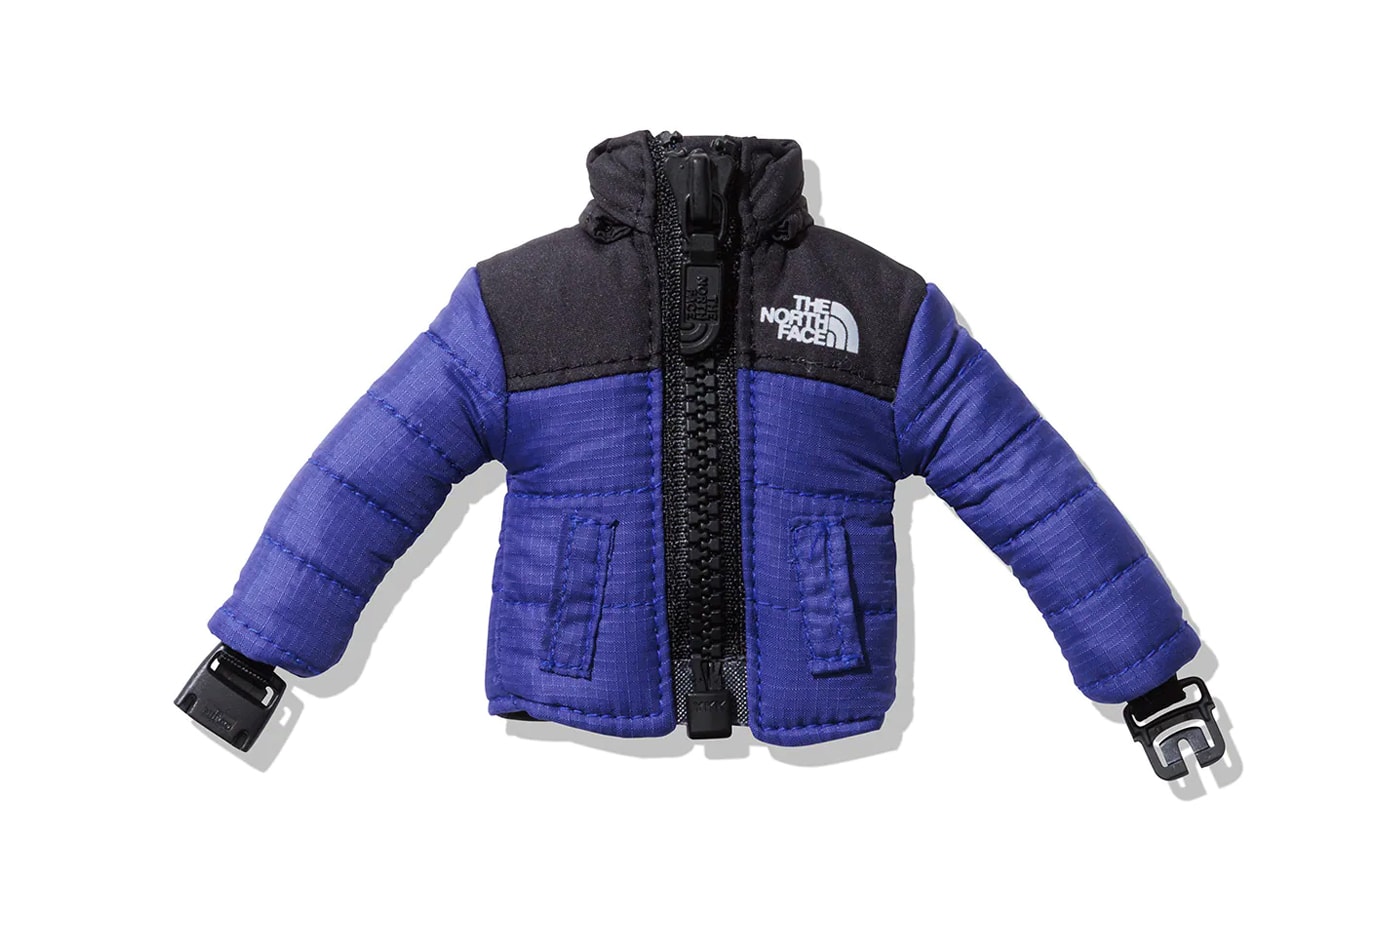 The North Face Face Introduces Mini Nuptse Jacket Keychains black yellow blue green gray sleeve buckle padded playful release info date price 